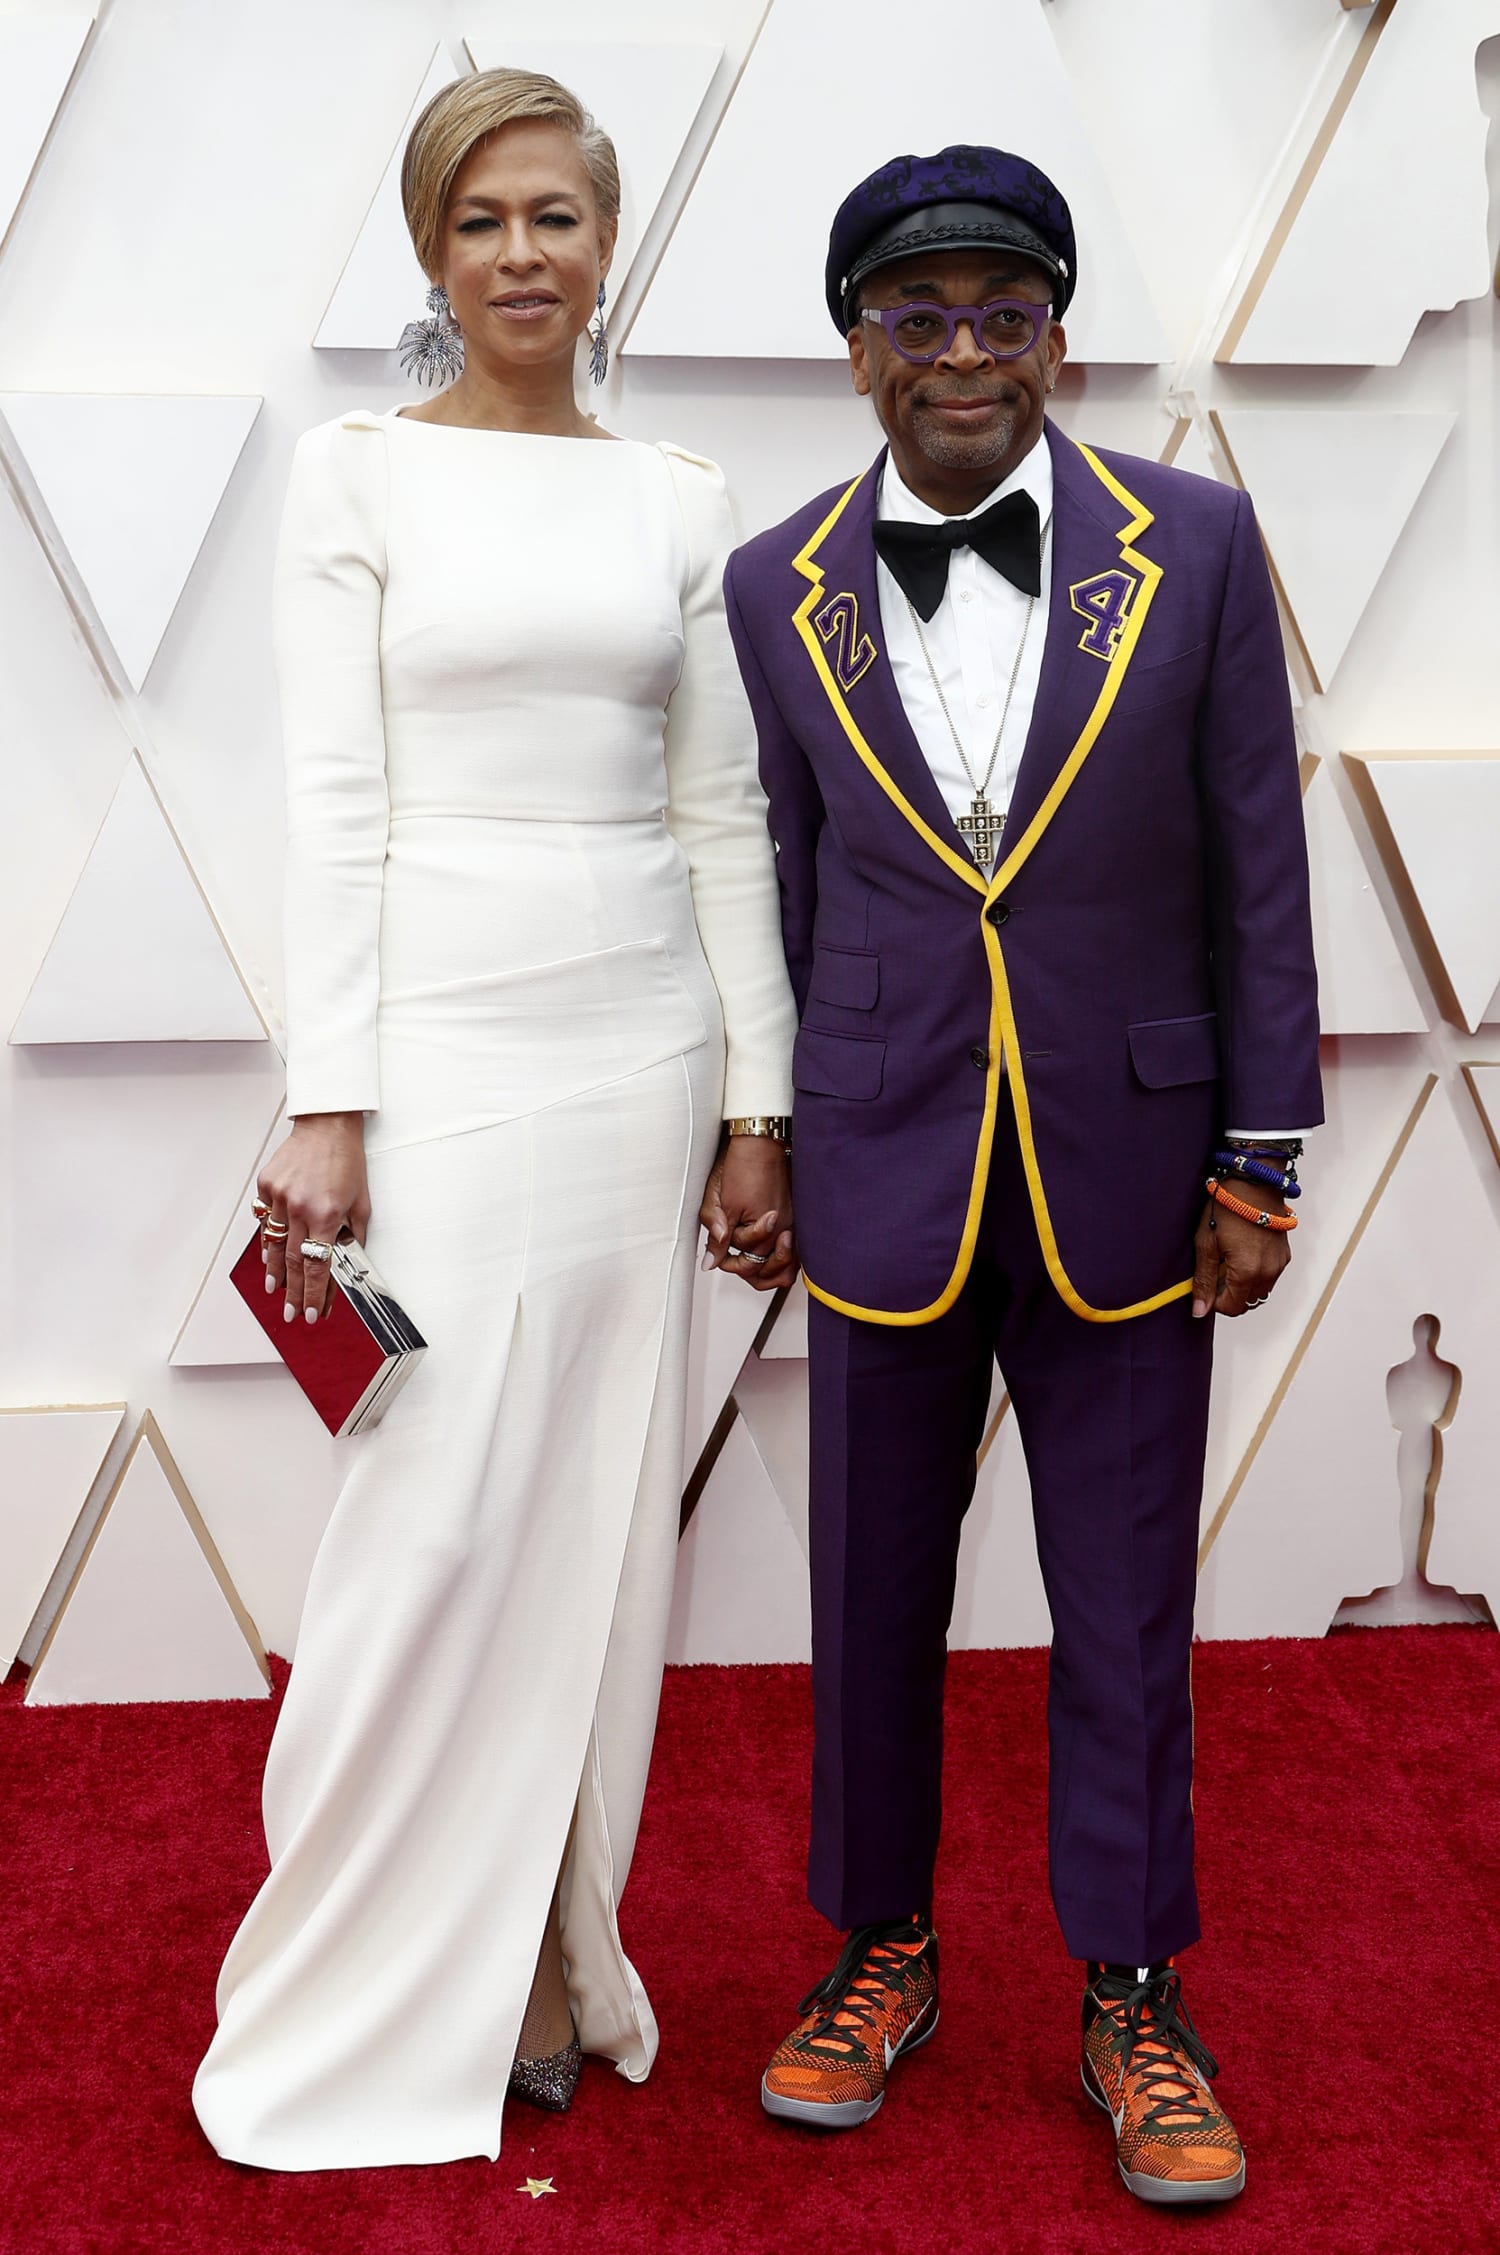 Kobe Bryant Was Honored at Oscars With Spike Lee's Suit